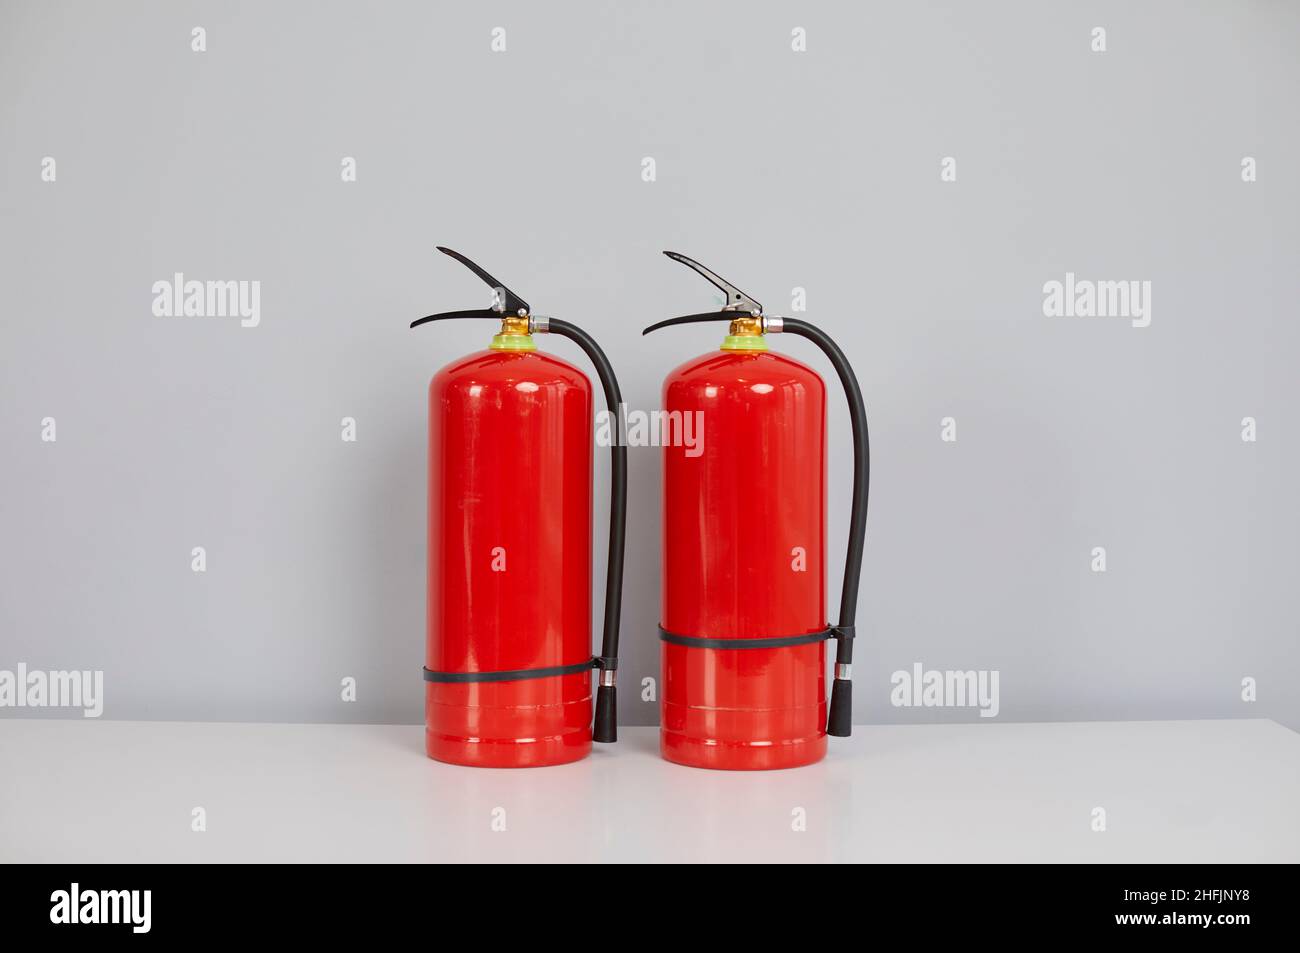 Two red chemical, carbon dioxide or air pressurized water fire extinguishers on a table Stock Photo